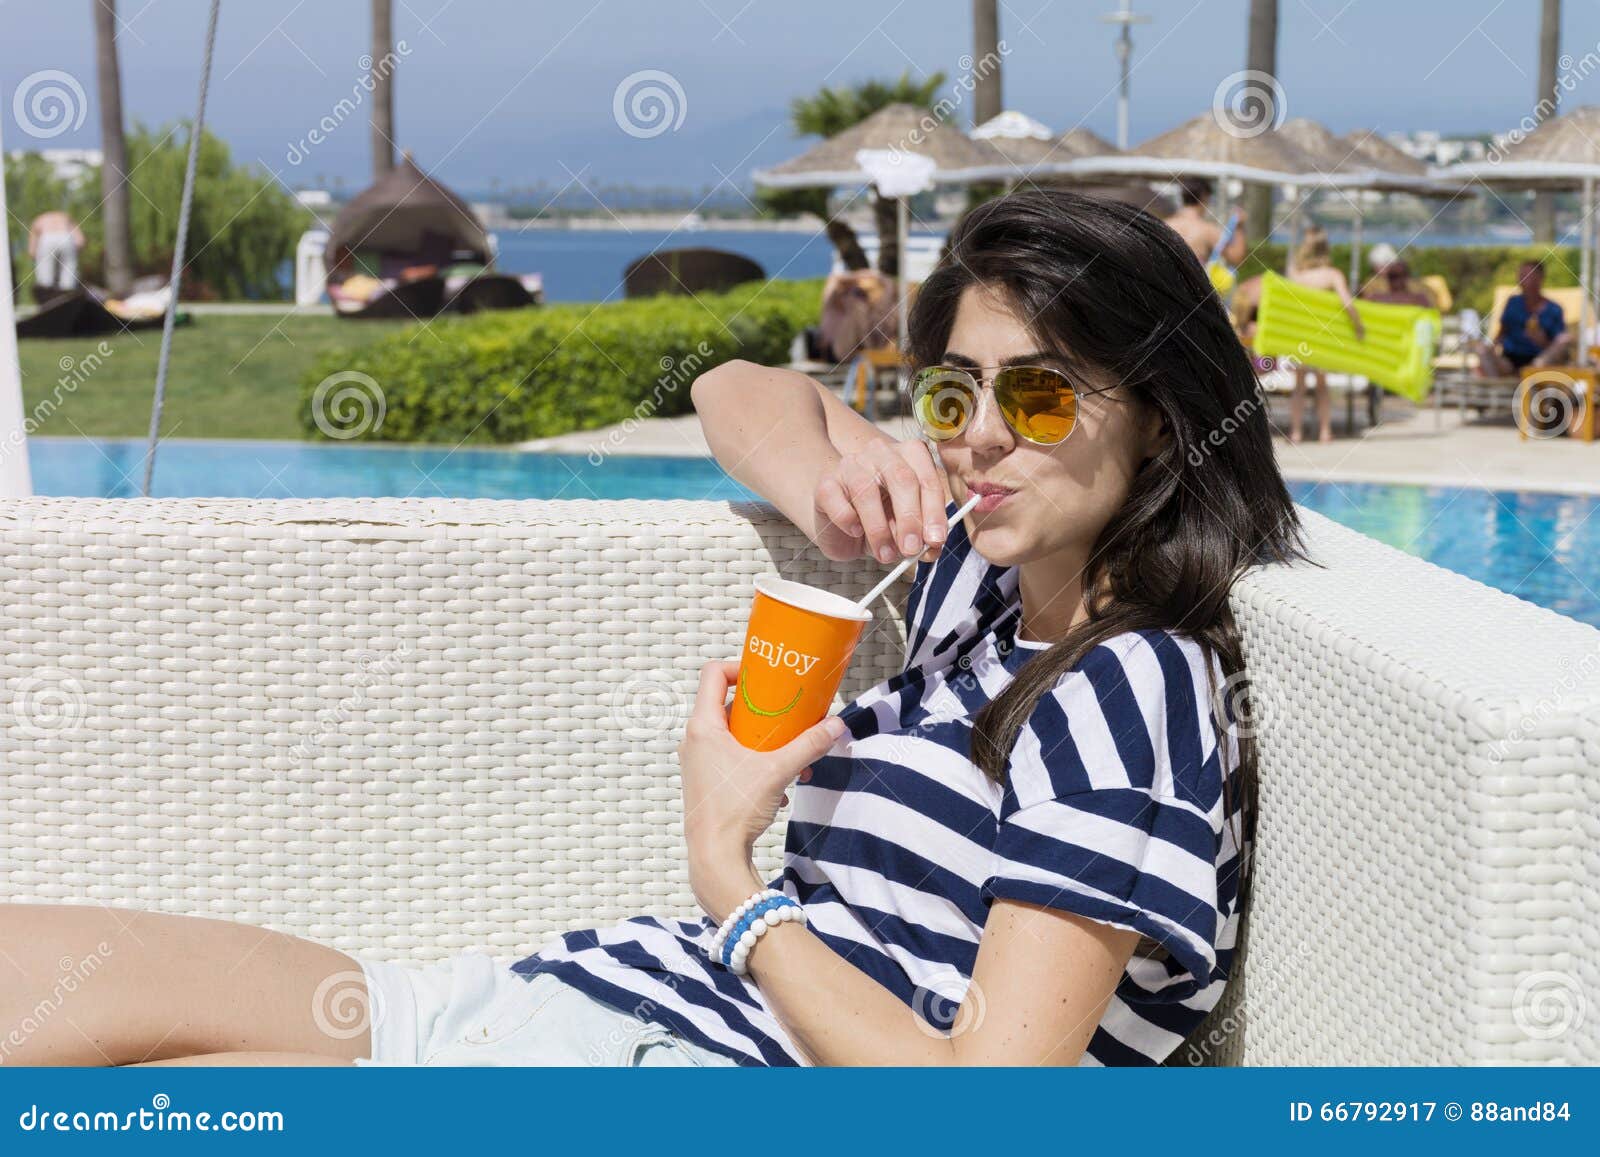 Portrait of Young Woman Drinking Juice on the Pool Stock Image - Image ...